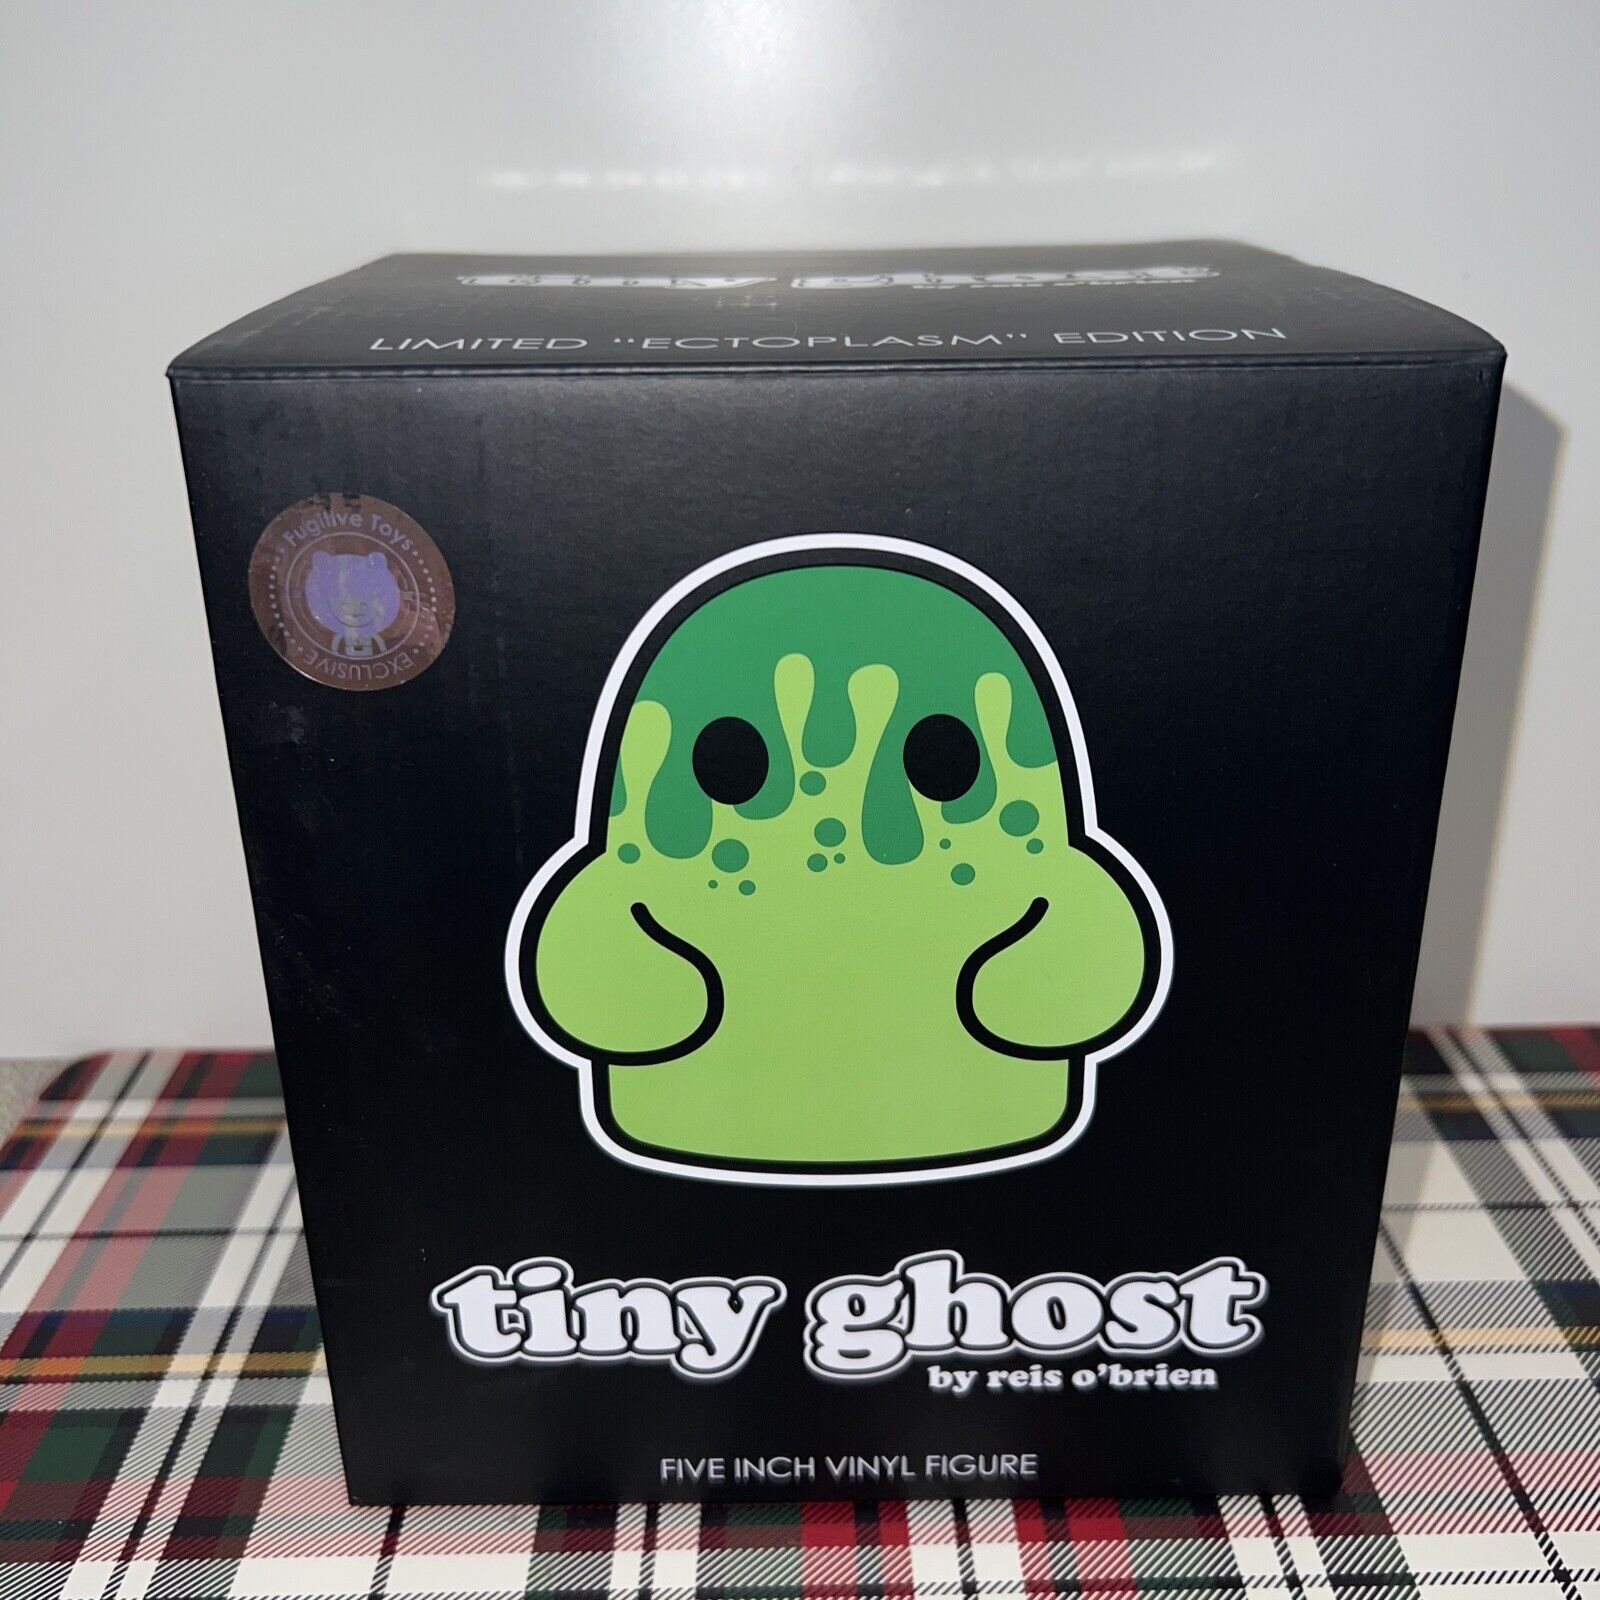 Tiny Ghost Ectoplasm Bimtoy 2019 ECCC Fugitive Toys LE400 Signed by Reis O’Brien